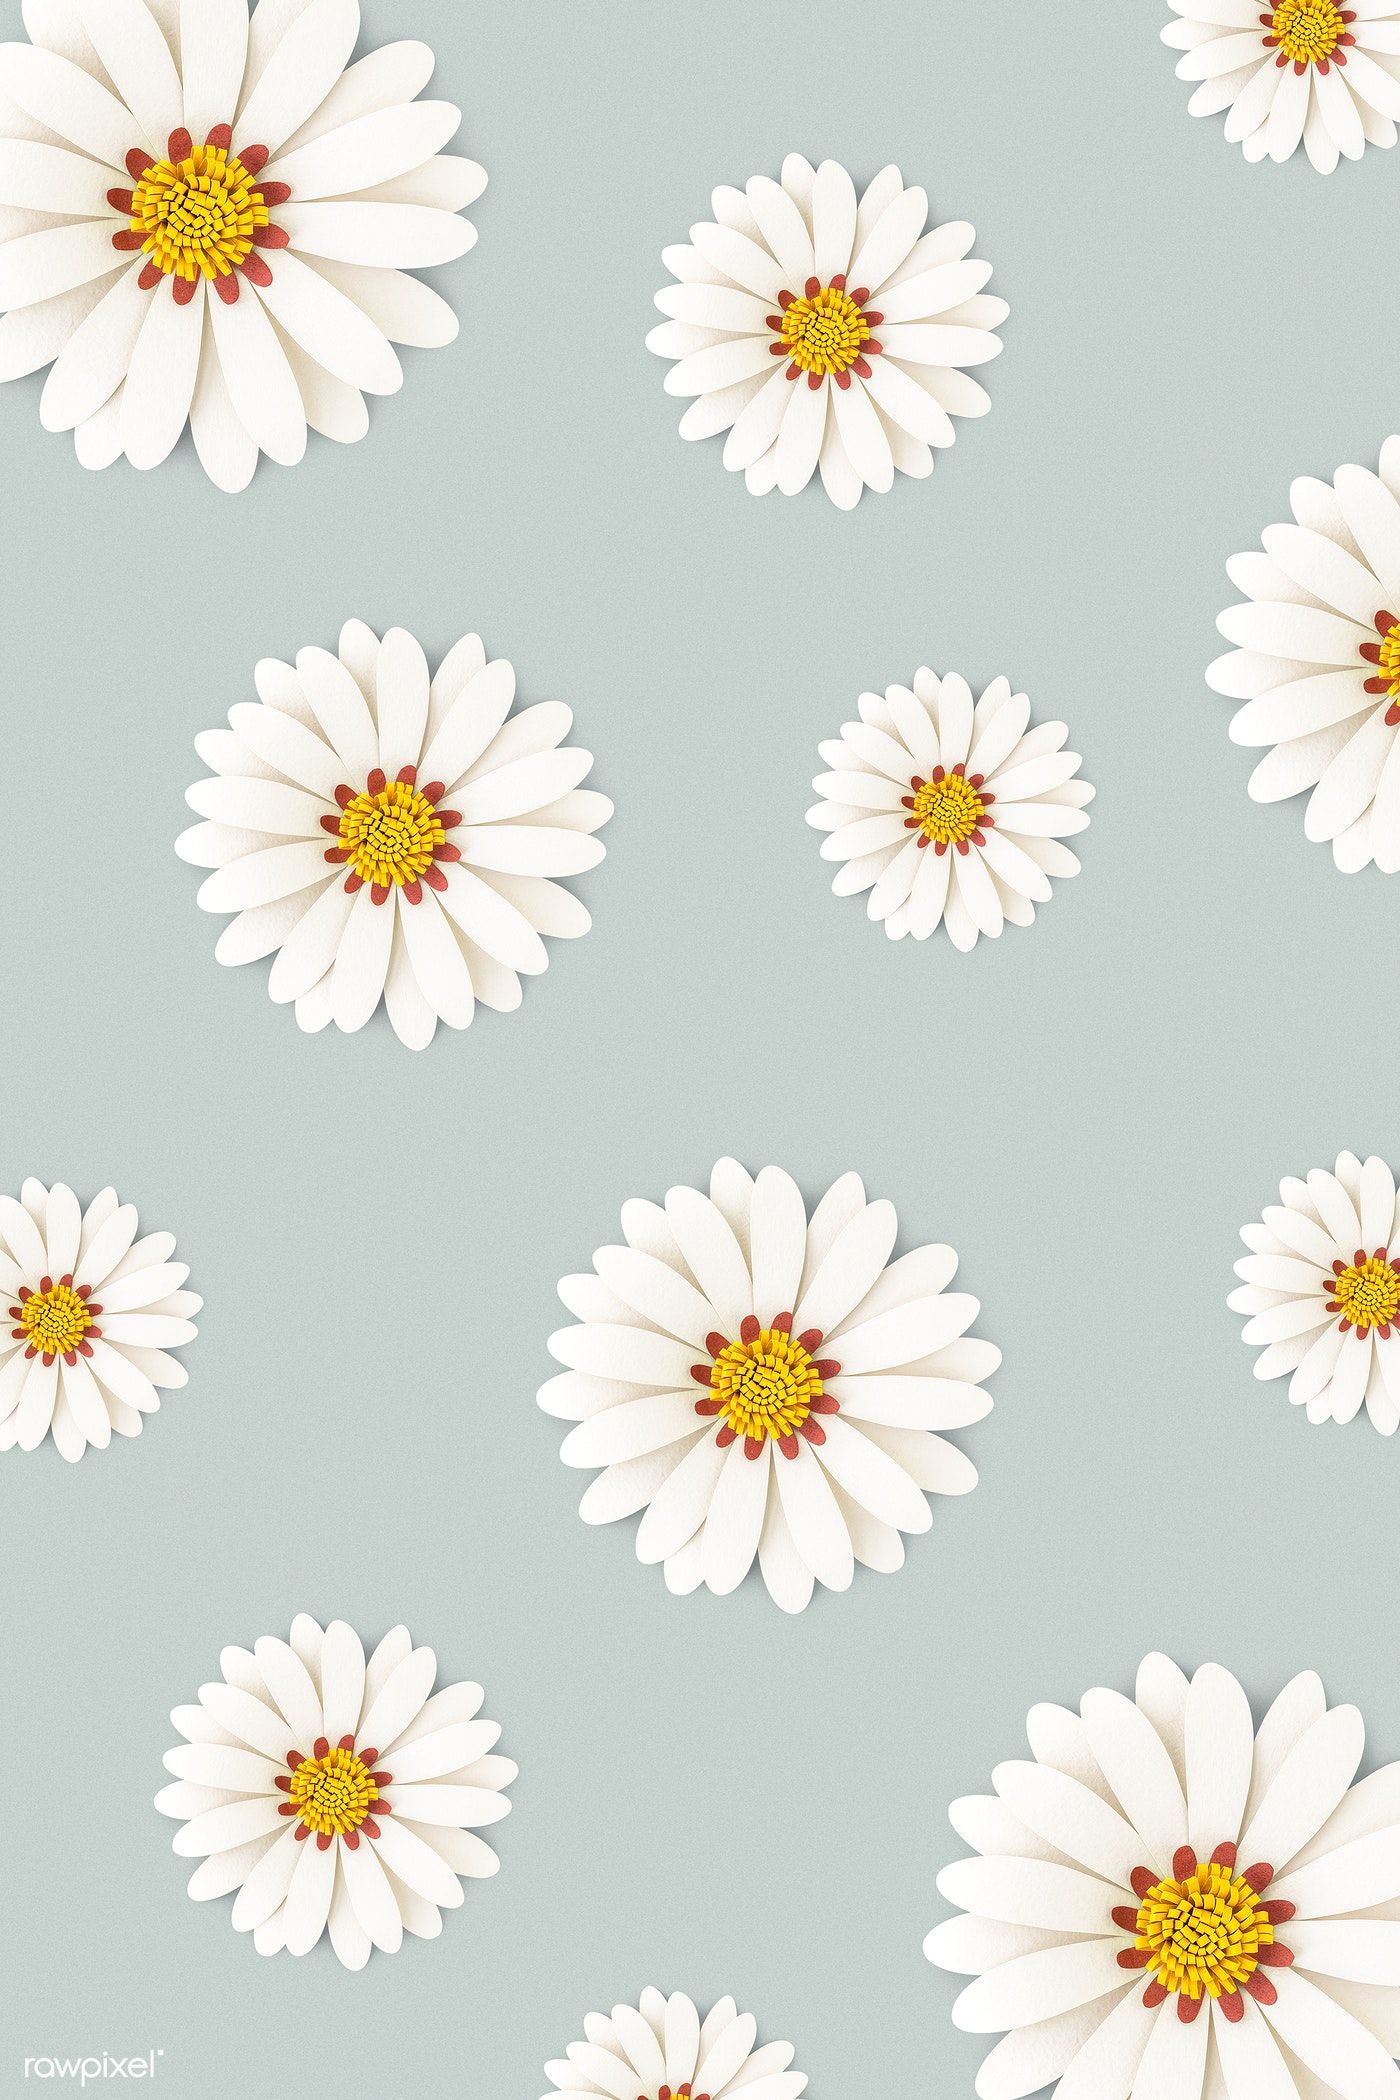 Download premium vector of White daisies pattern on a gray background - Daisy